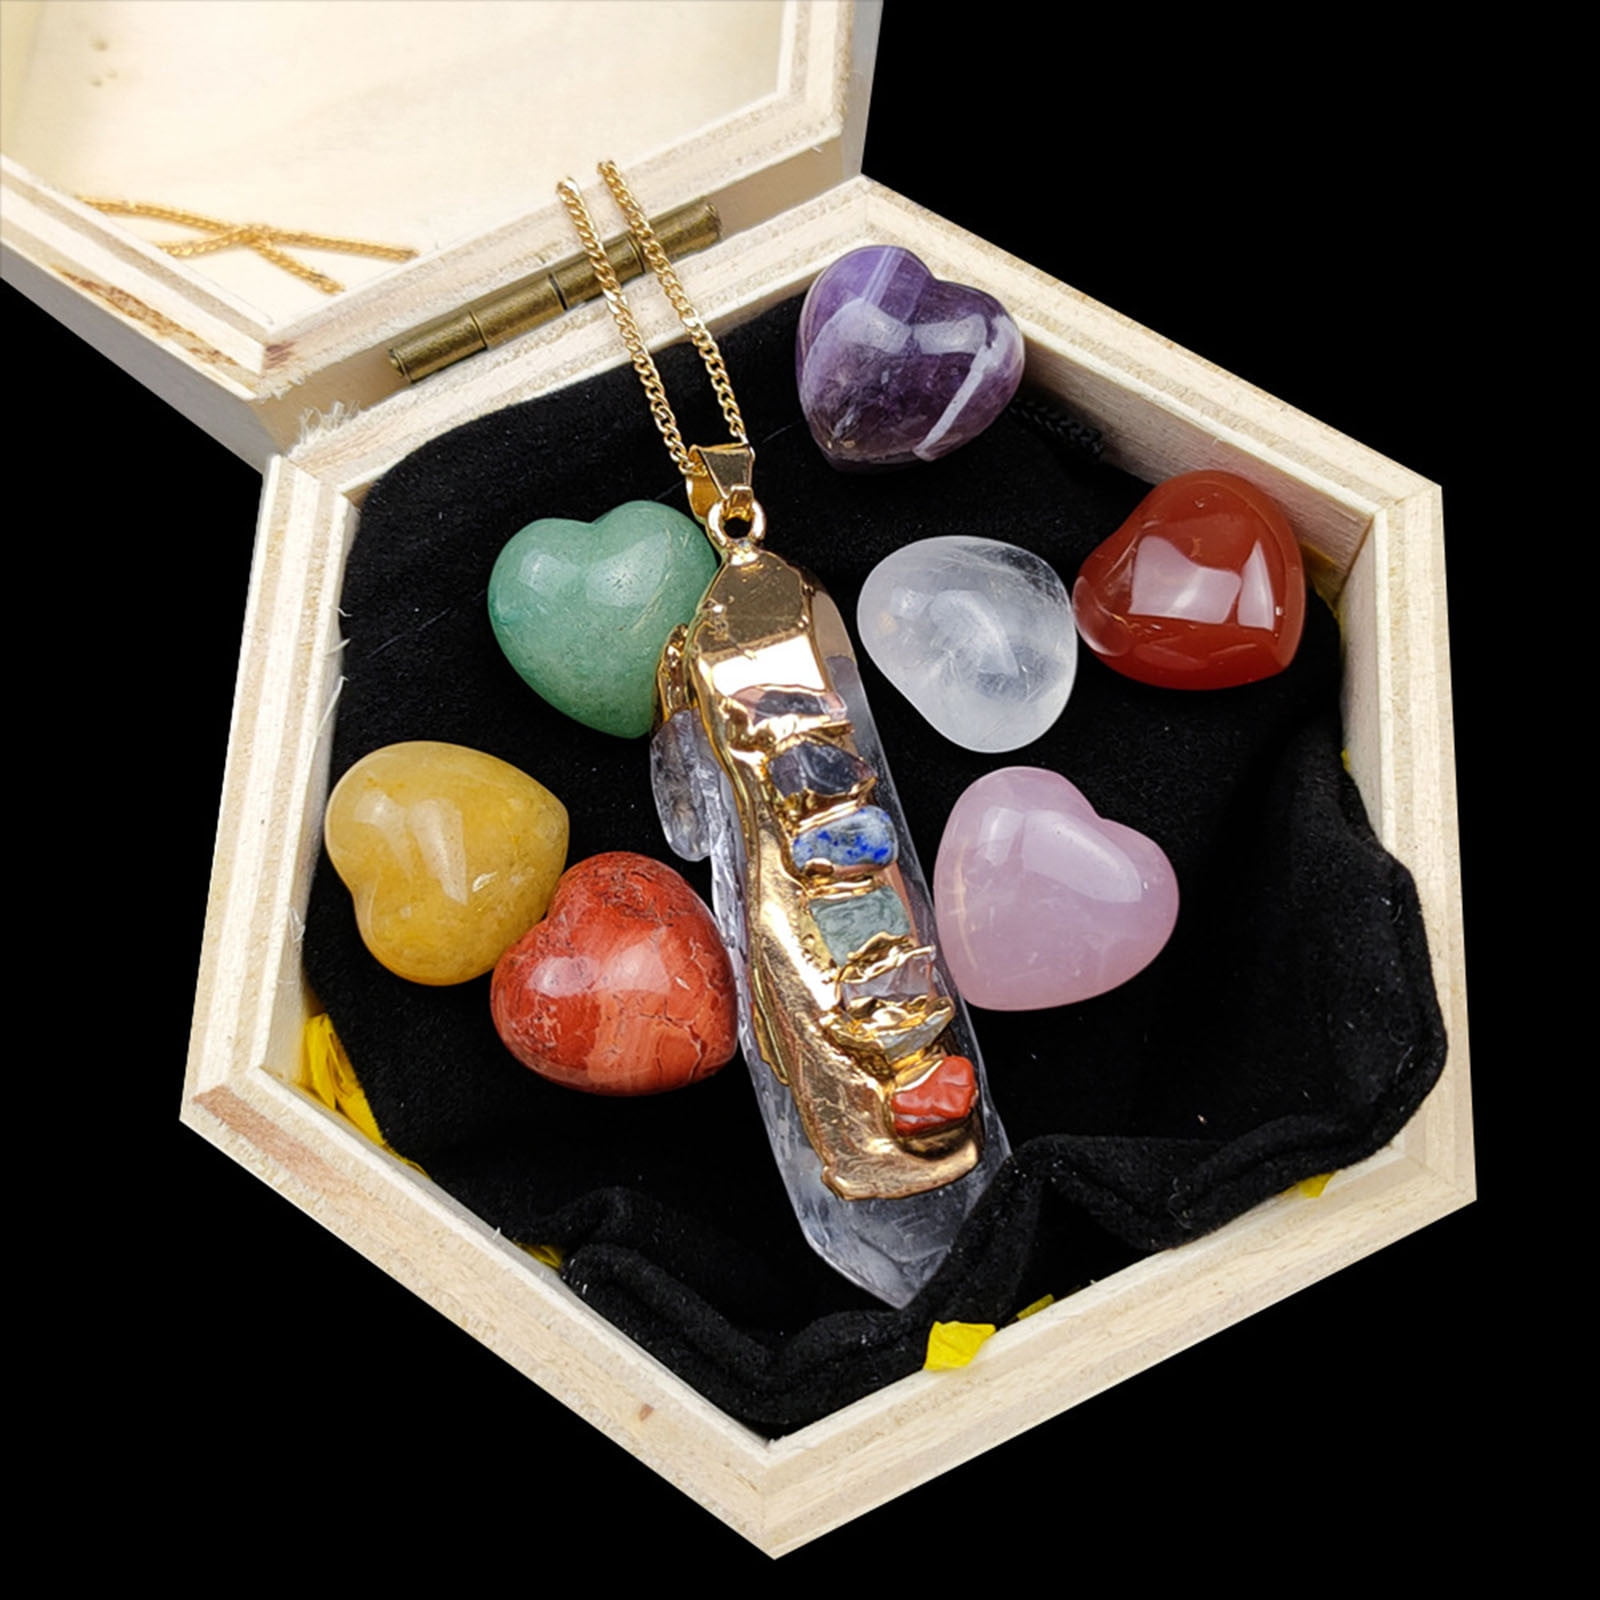 Christmas Saving Clearance! Sruiluo Mothers Day Gifts Crystal Decor Healing Crystals Set, Crystal Agate Ornaments Irregular Pendant Gift Box Wooden Box Set